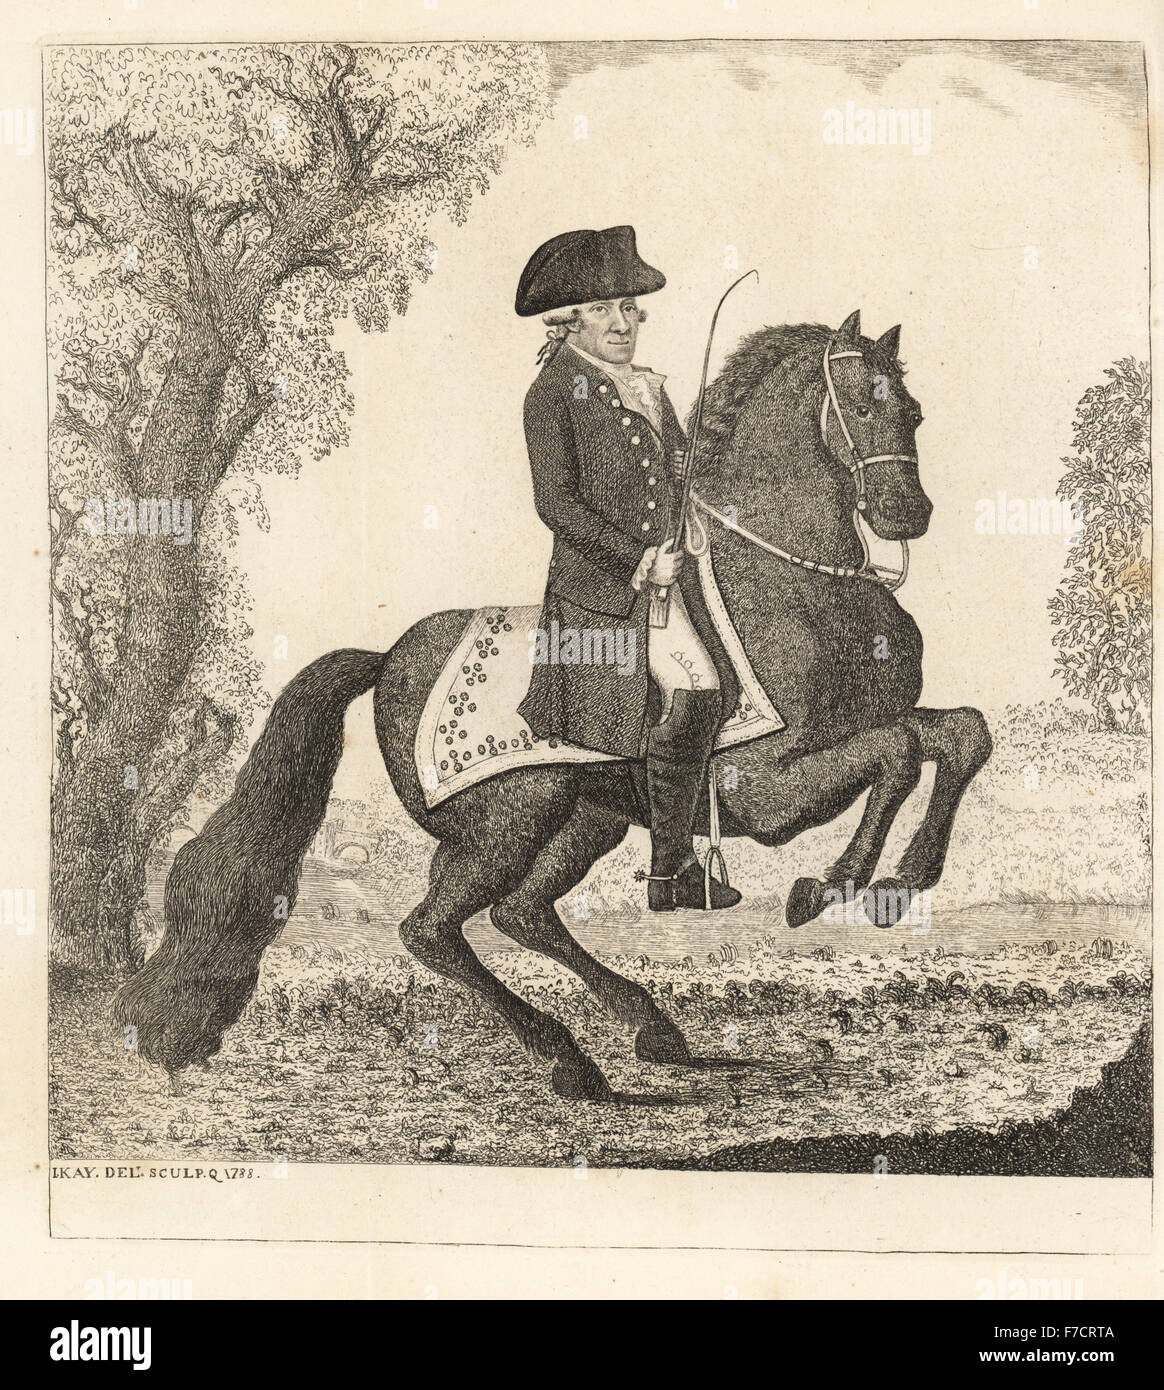 Angelo Tremamondo, Italian riding master and first Master of the Royal Riding Menage, and brother to the famous fencing master Dominico Angelo Malevolti Tremamondo. Copperplate engraving by John Kay from A Series of Original Portraits and Caricature Etchings, Hugh Paton, Edinburgh, 1842. Stock Photo